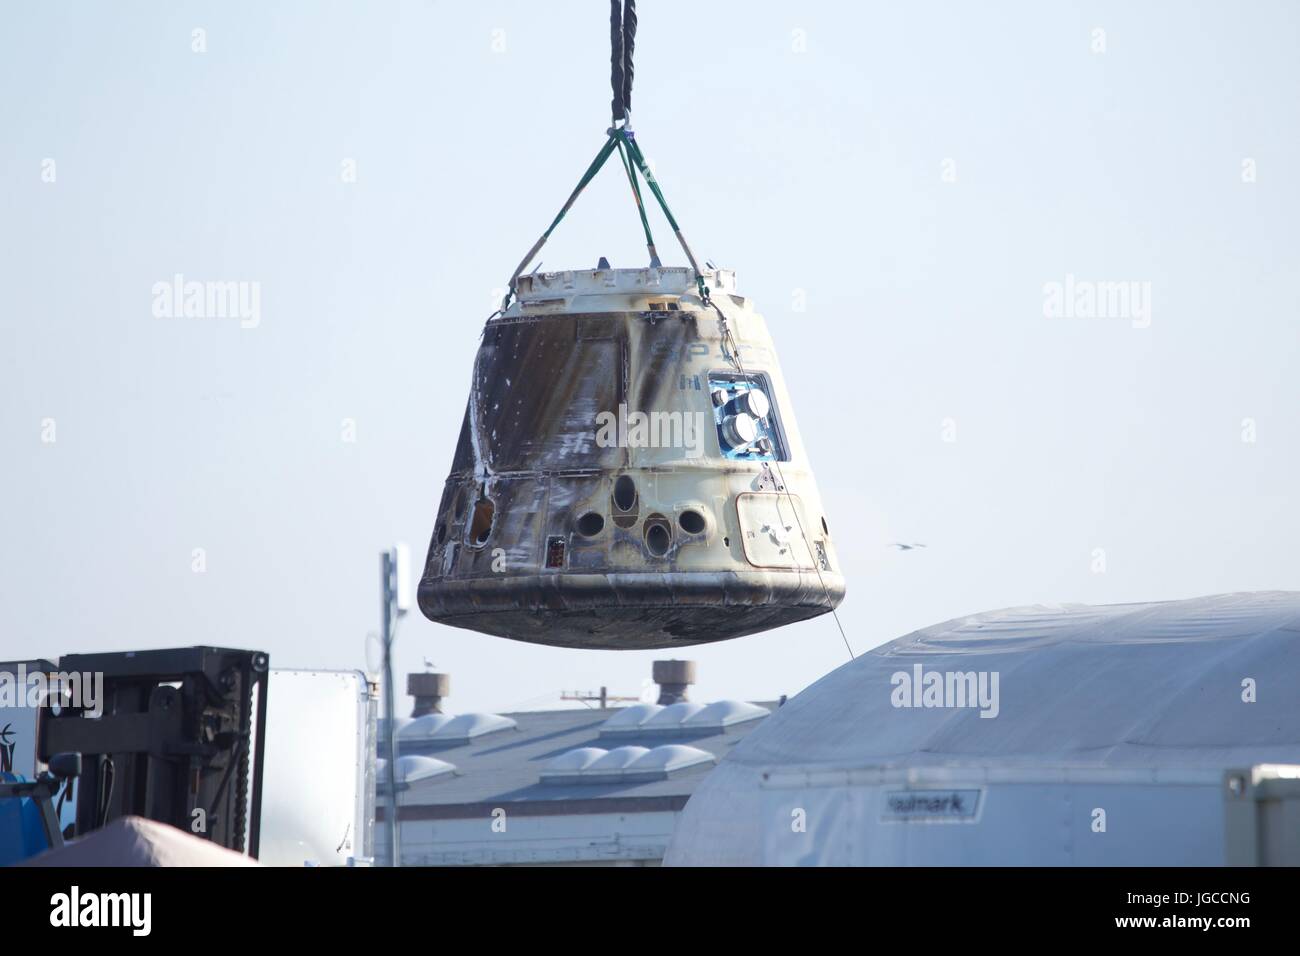 San Pedro, USA. 4th July, 2017. SpaceX's Dragon cargo spacecraft is seen in San Pedro, California, the United States, July 4, 2017. U.S. space firm SpaceX's Dragon cargo spacecraft returned to Earth from the International Space Station (ISS) on Monday, bringing back the first Chinese experiment ever to visit the orbiting laboratory. The unmanned spacecraft splashed down in the Pacific Ocean at 8:12 a.m. EDT (1212 GMT) about five hours leaving the space station. Credit: Matt Hartman/Xinhua/Alamy Live News Stock Photo